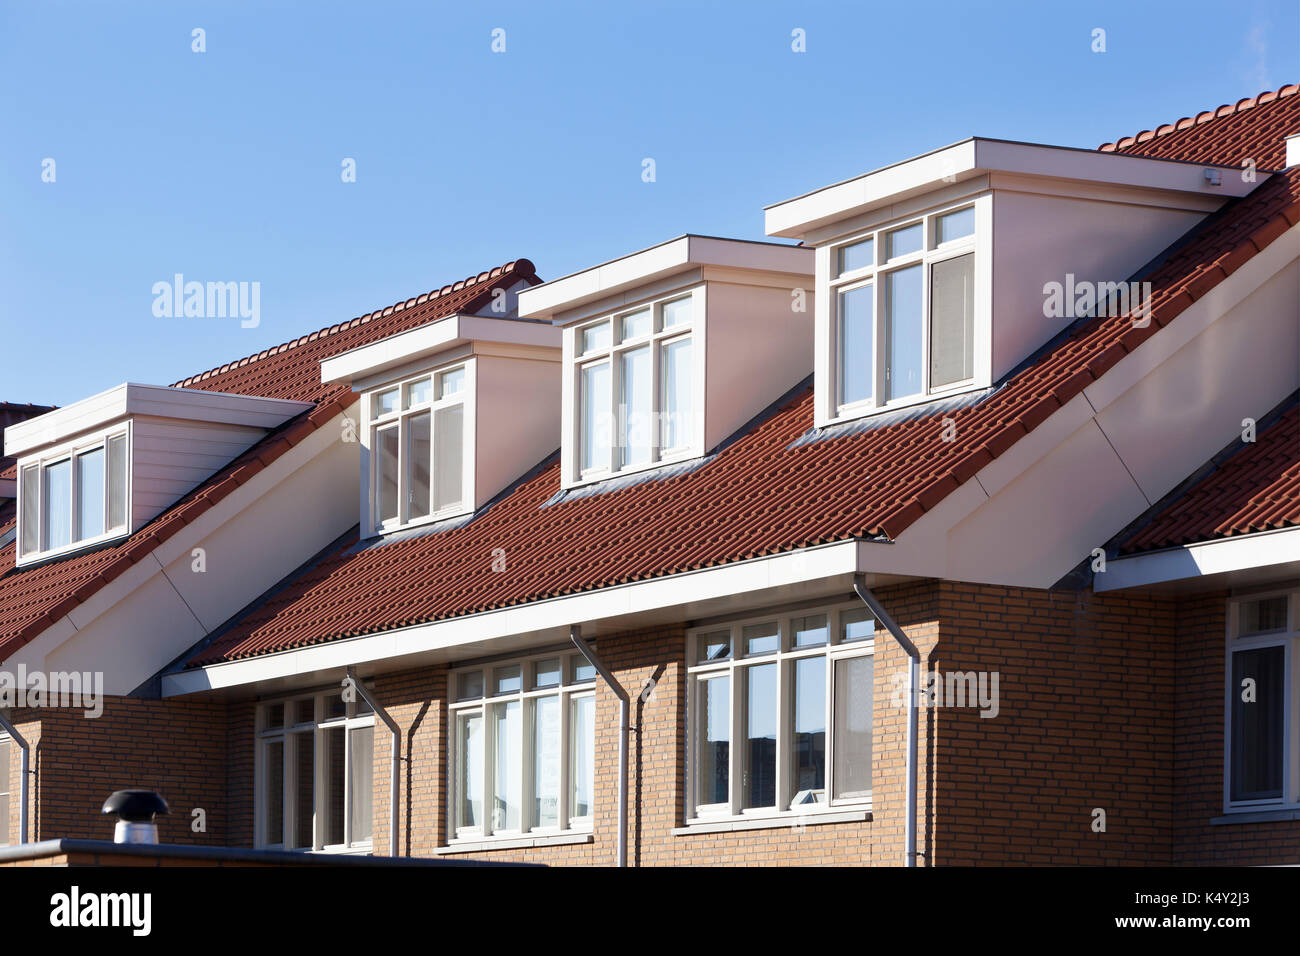 Red tiled roof with dormers in the Netherlands Stock Photo